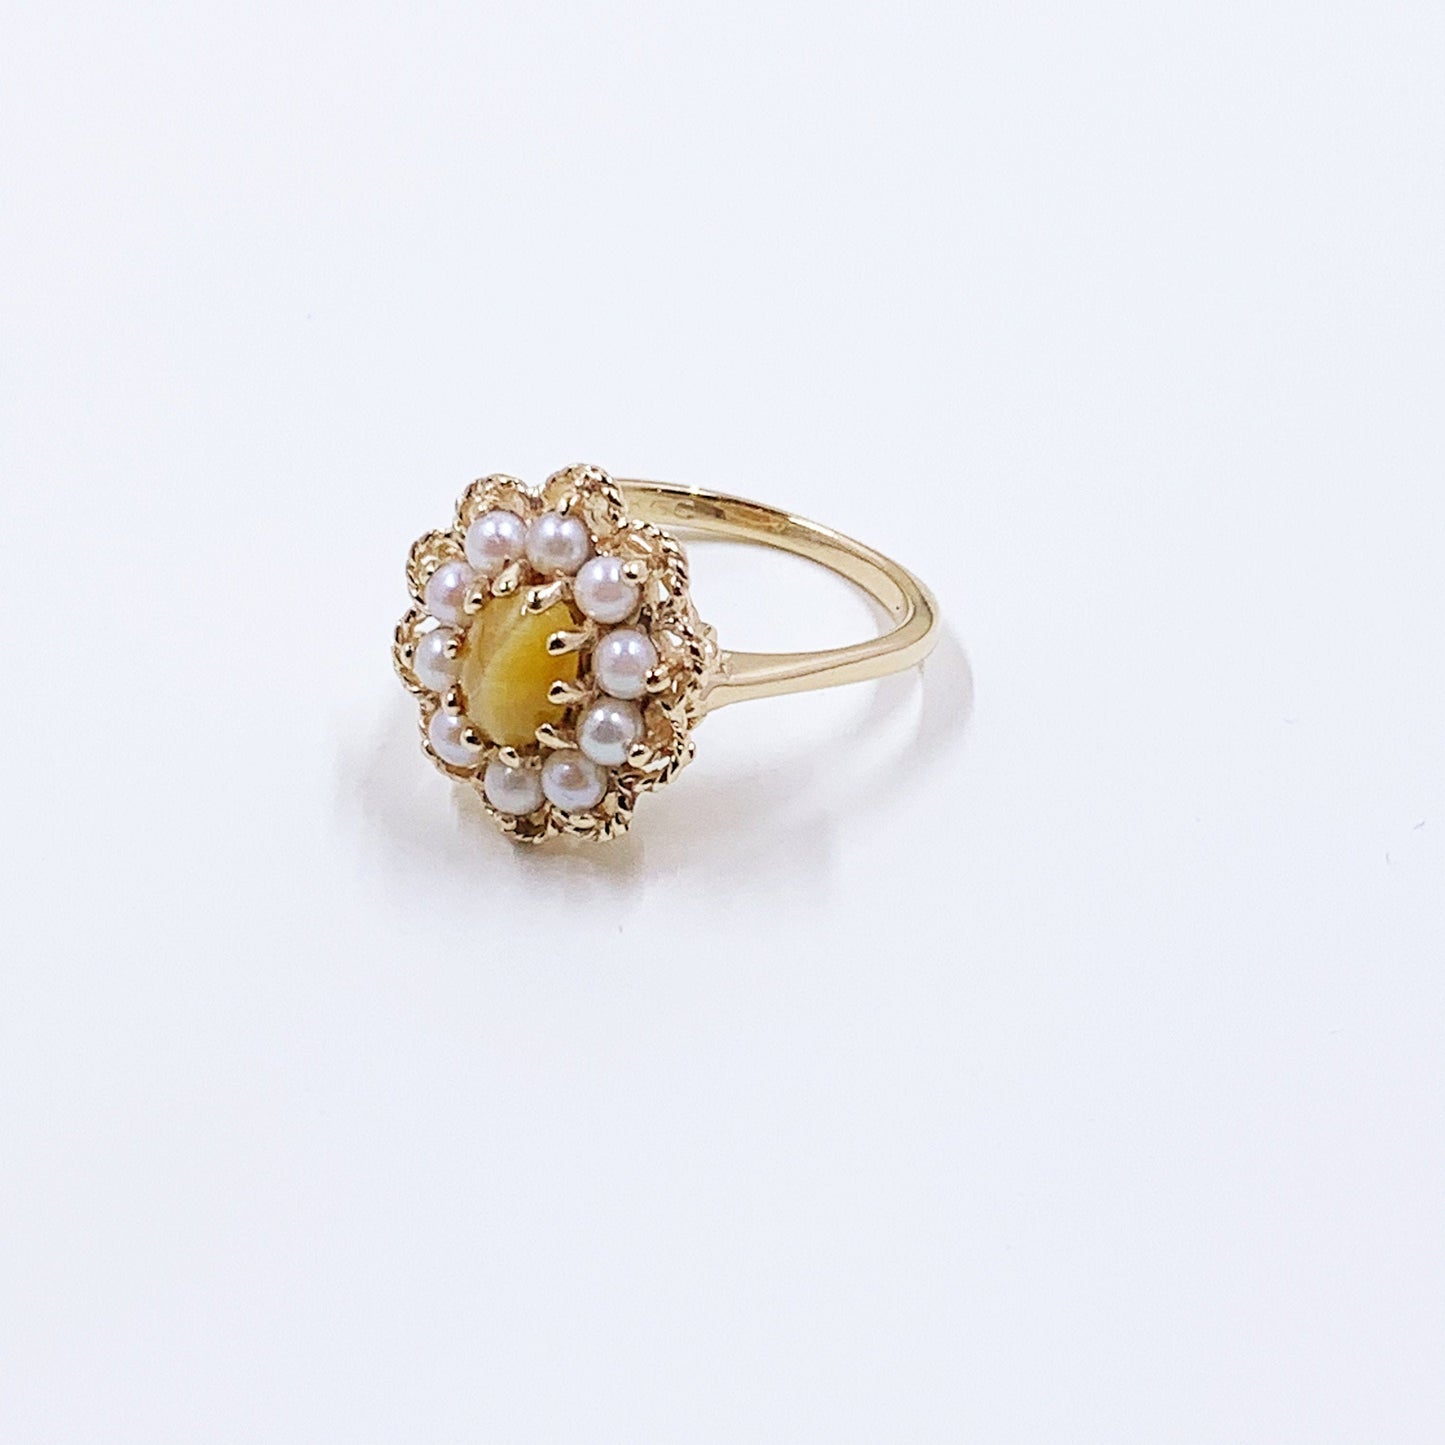 Vintage Gold Tigers Eye and Pearl Halo Ring | 14K Gold Halo Flower Ring | KGC Ring | Size 7 1/4